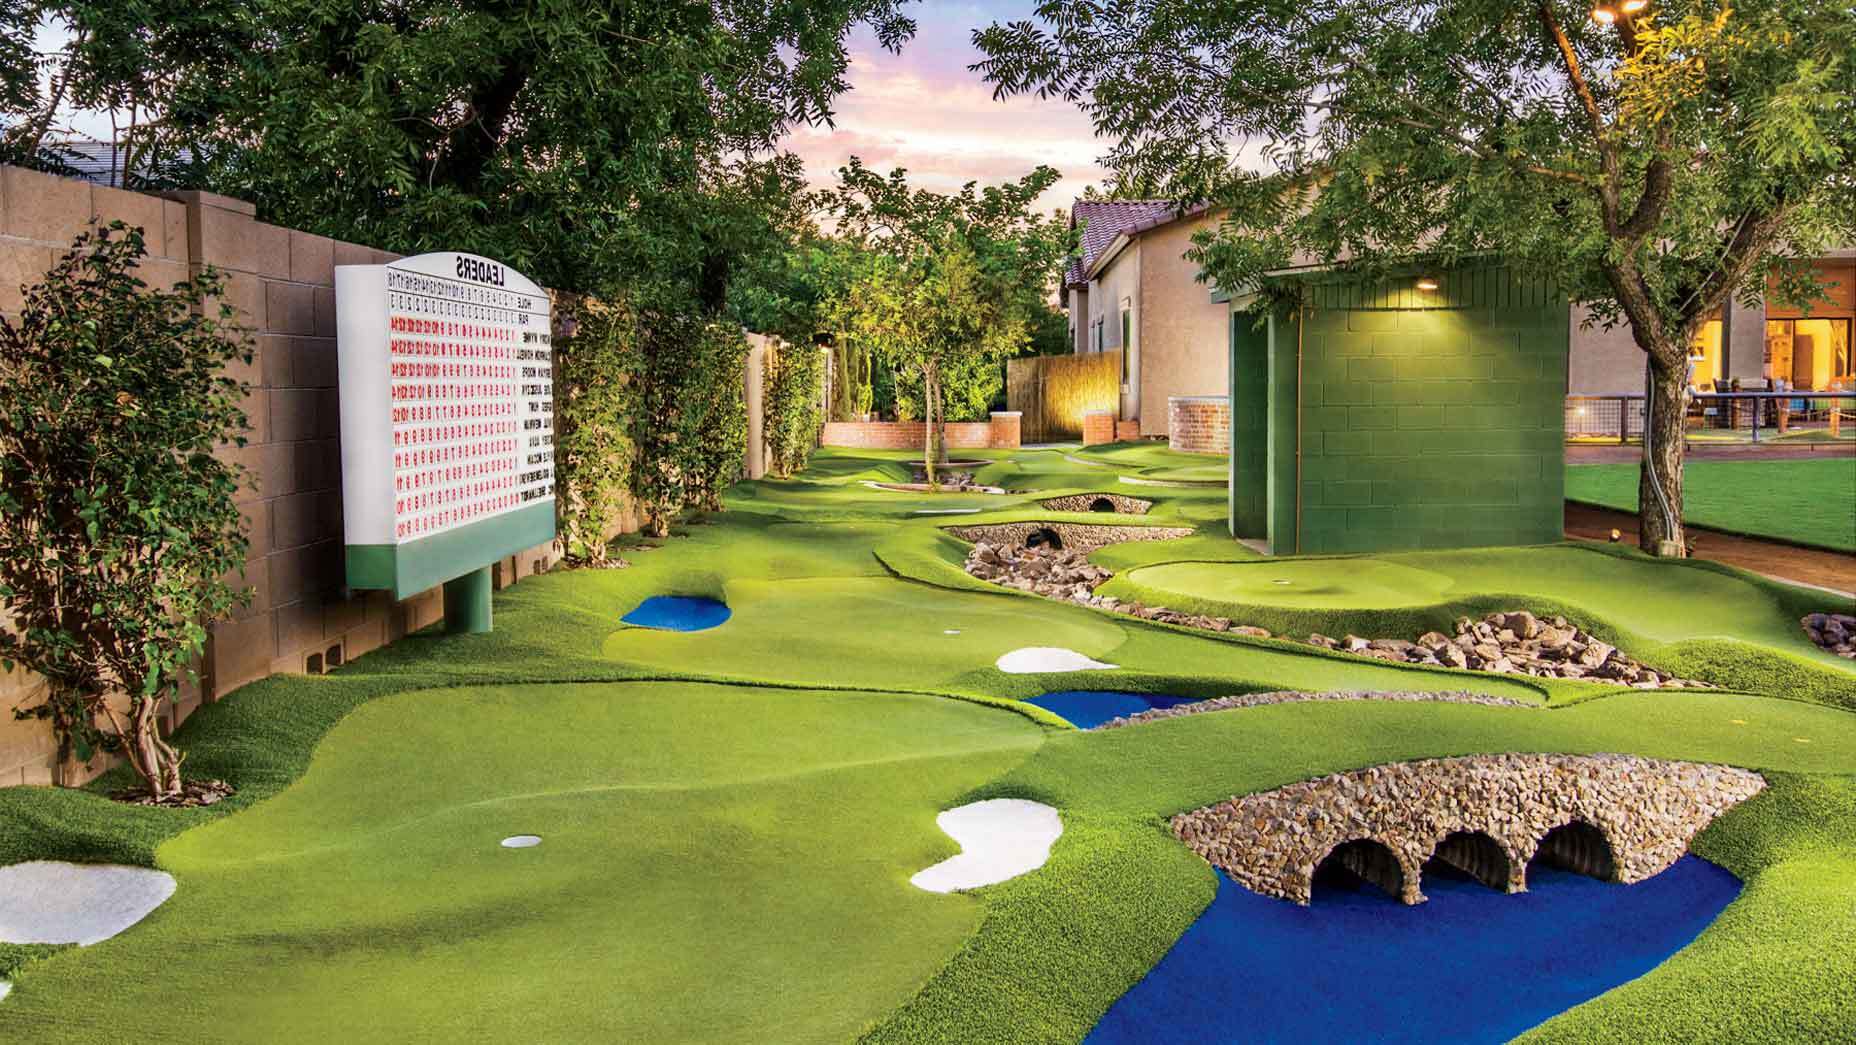 How To Build A Putting Green In Backyard